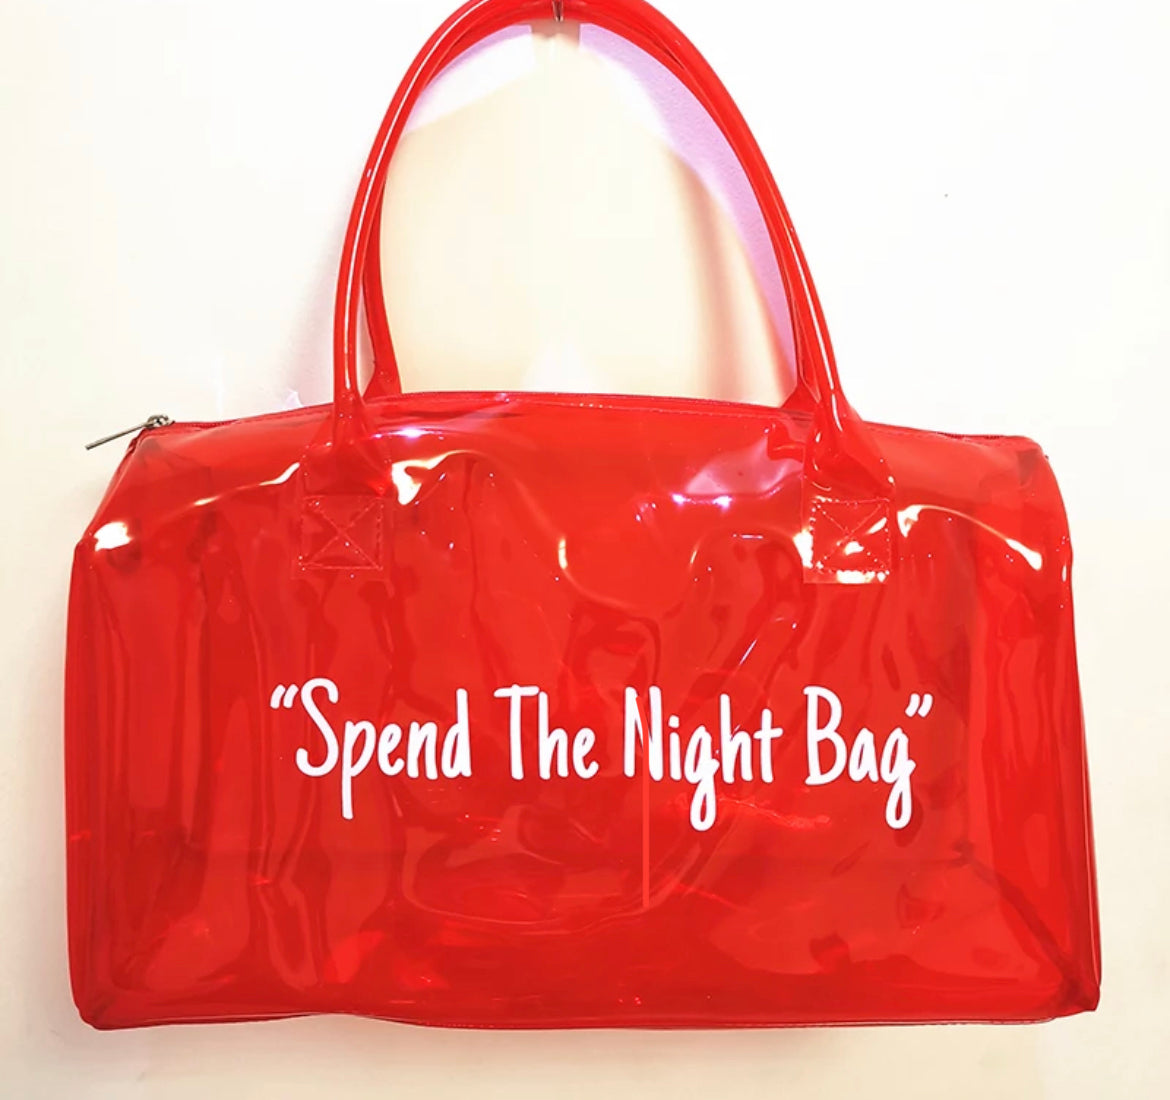 Get your bag now for just 4 dollars and change, spend the night bag